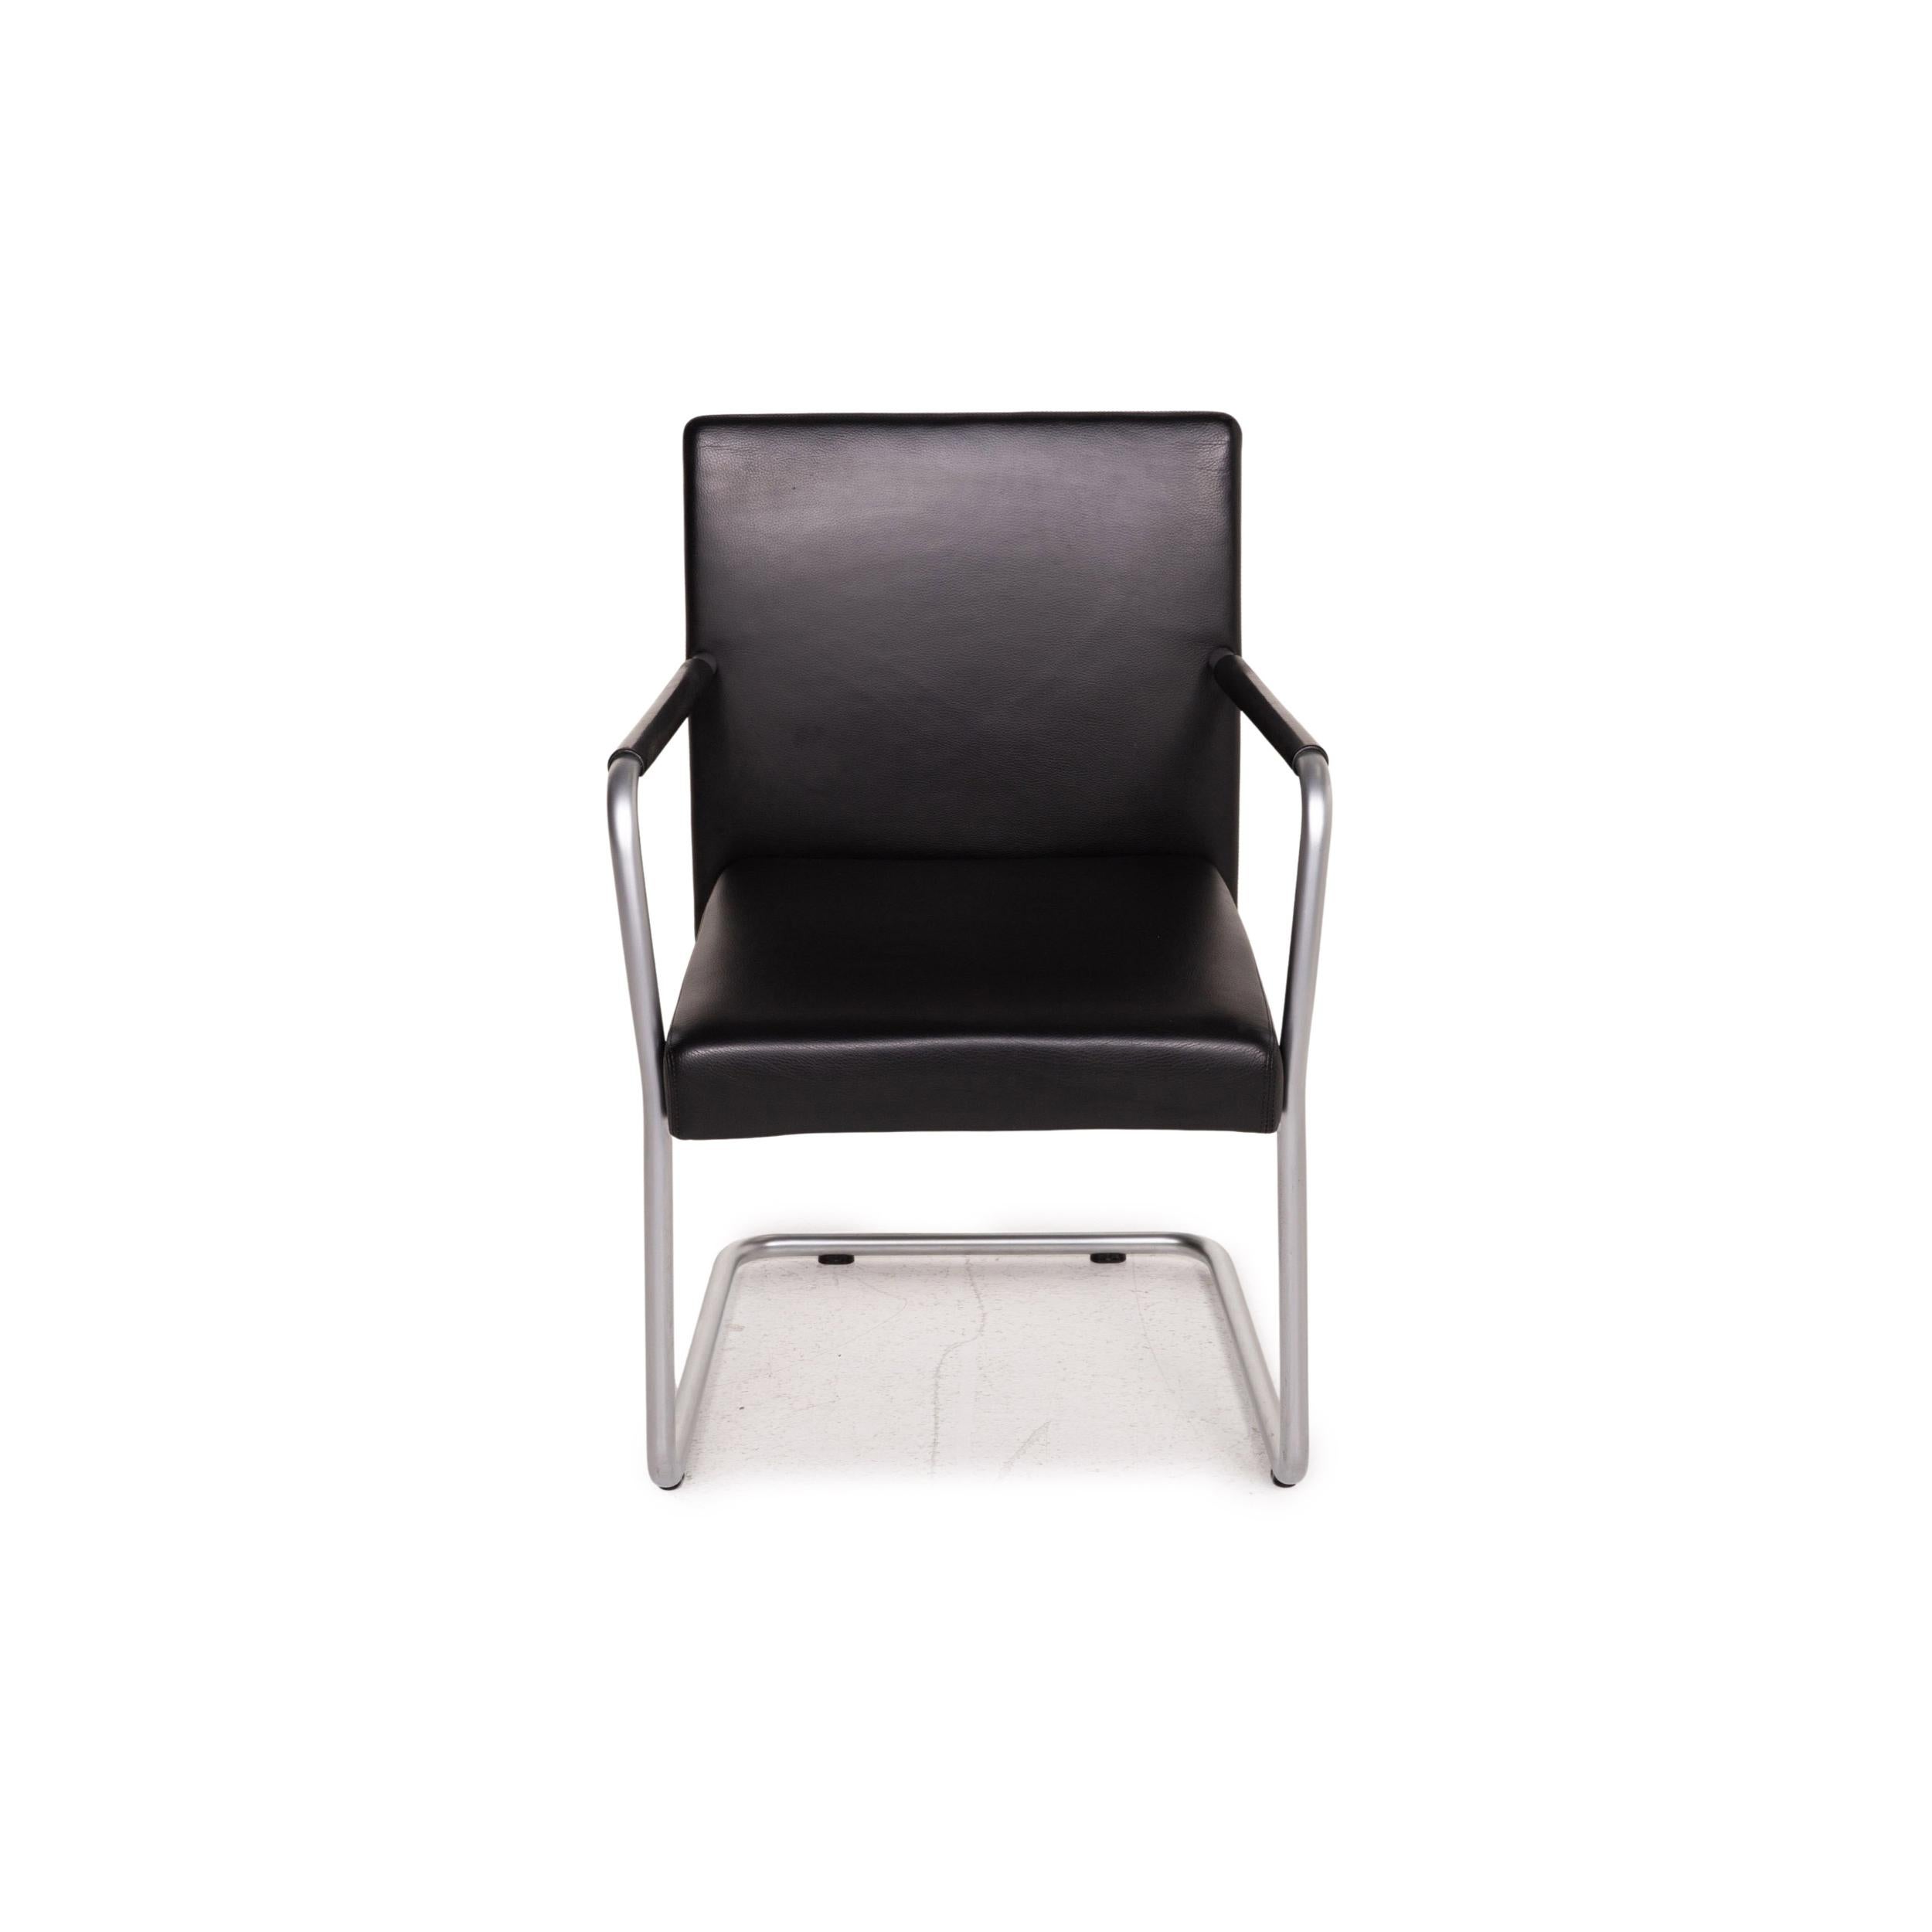 Contemporary Walter Knoll Jason 1519 Leather Chair Black Cantilever For Sale